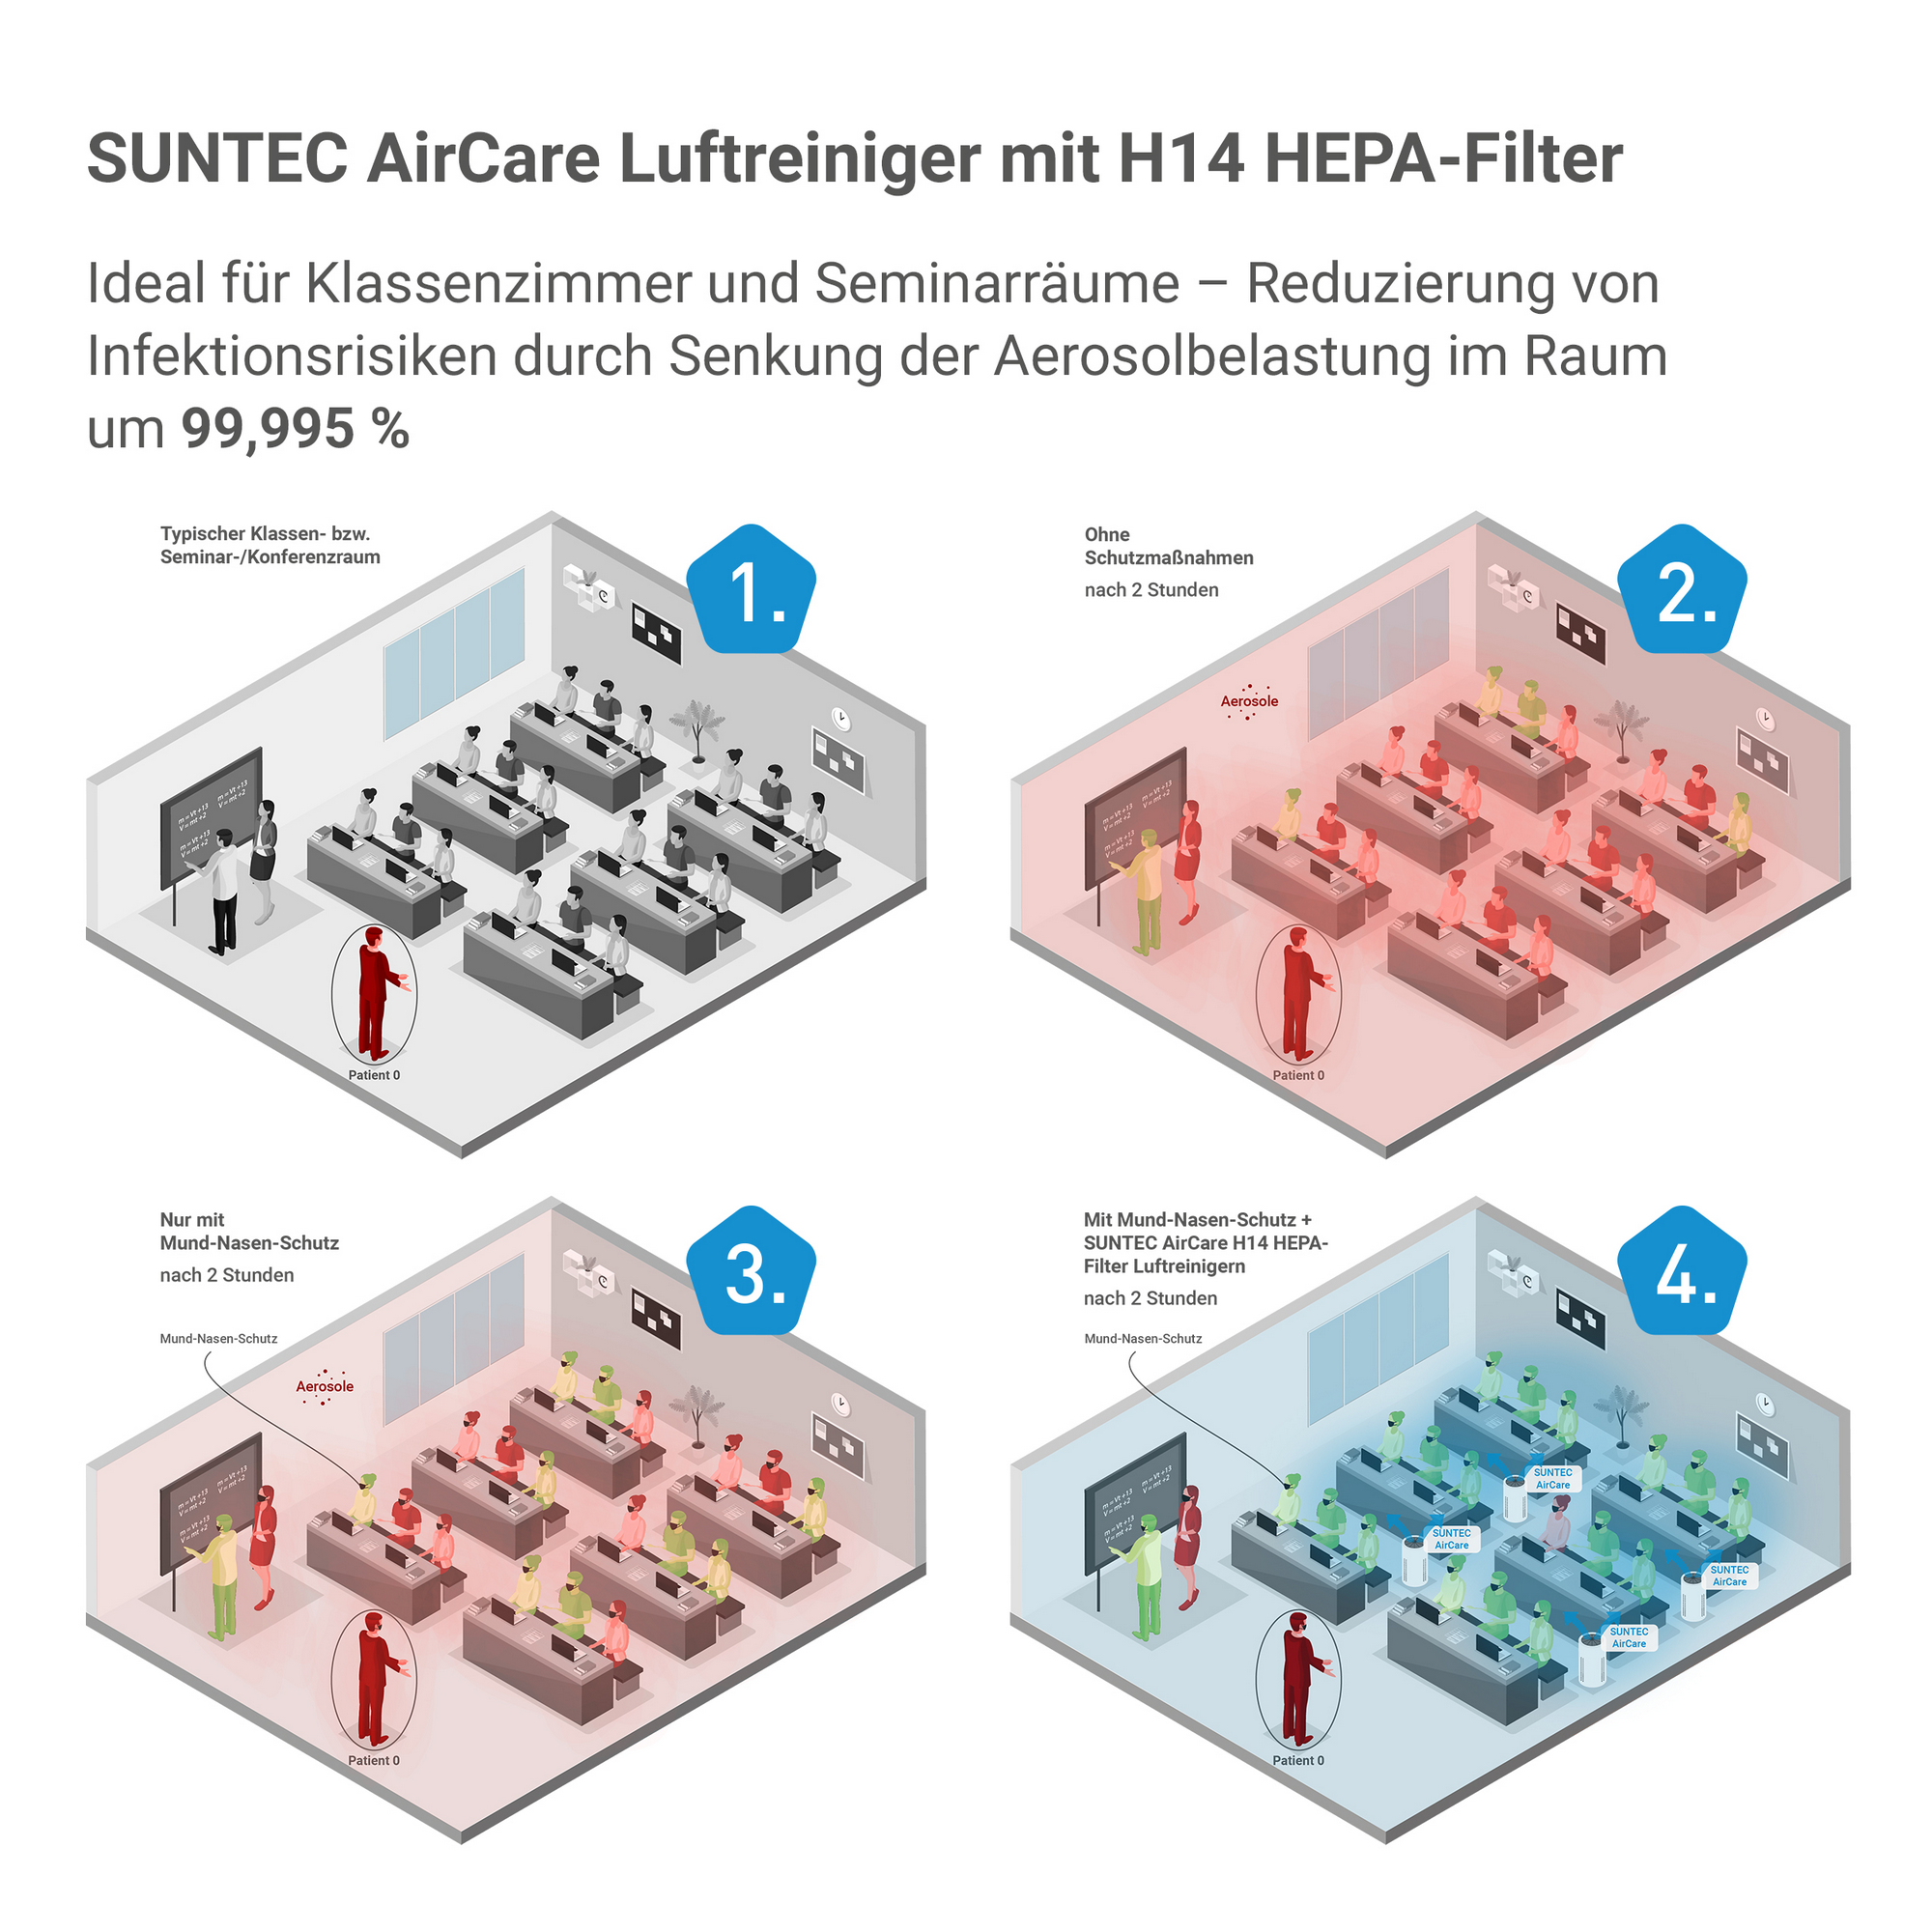 Luftreiniger 'AirCare 4000 VirusEx H14 MultiFilter' mit H14 HEPA-Filter, 455 m³/h + product picture